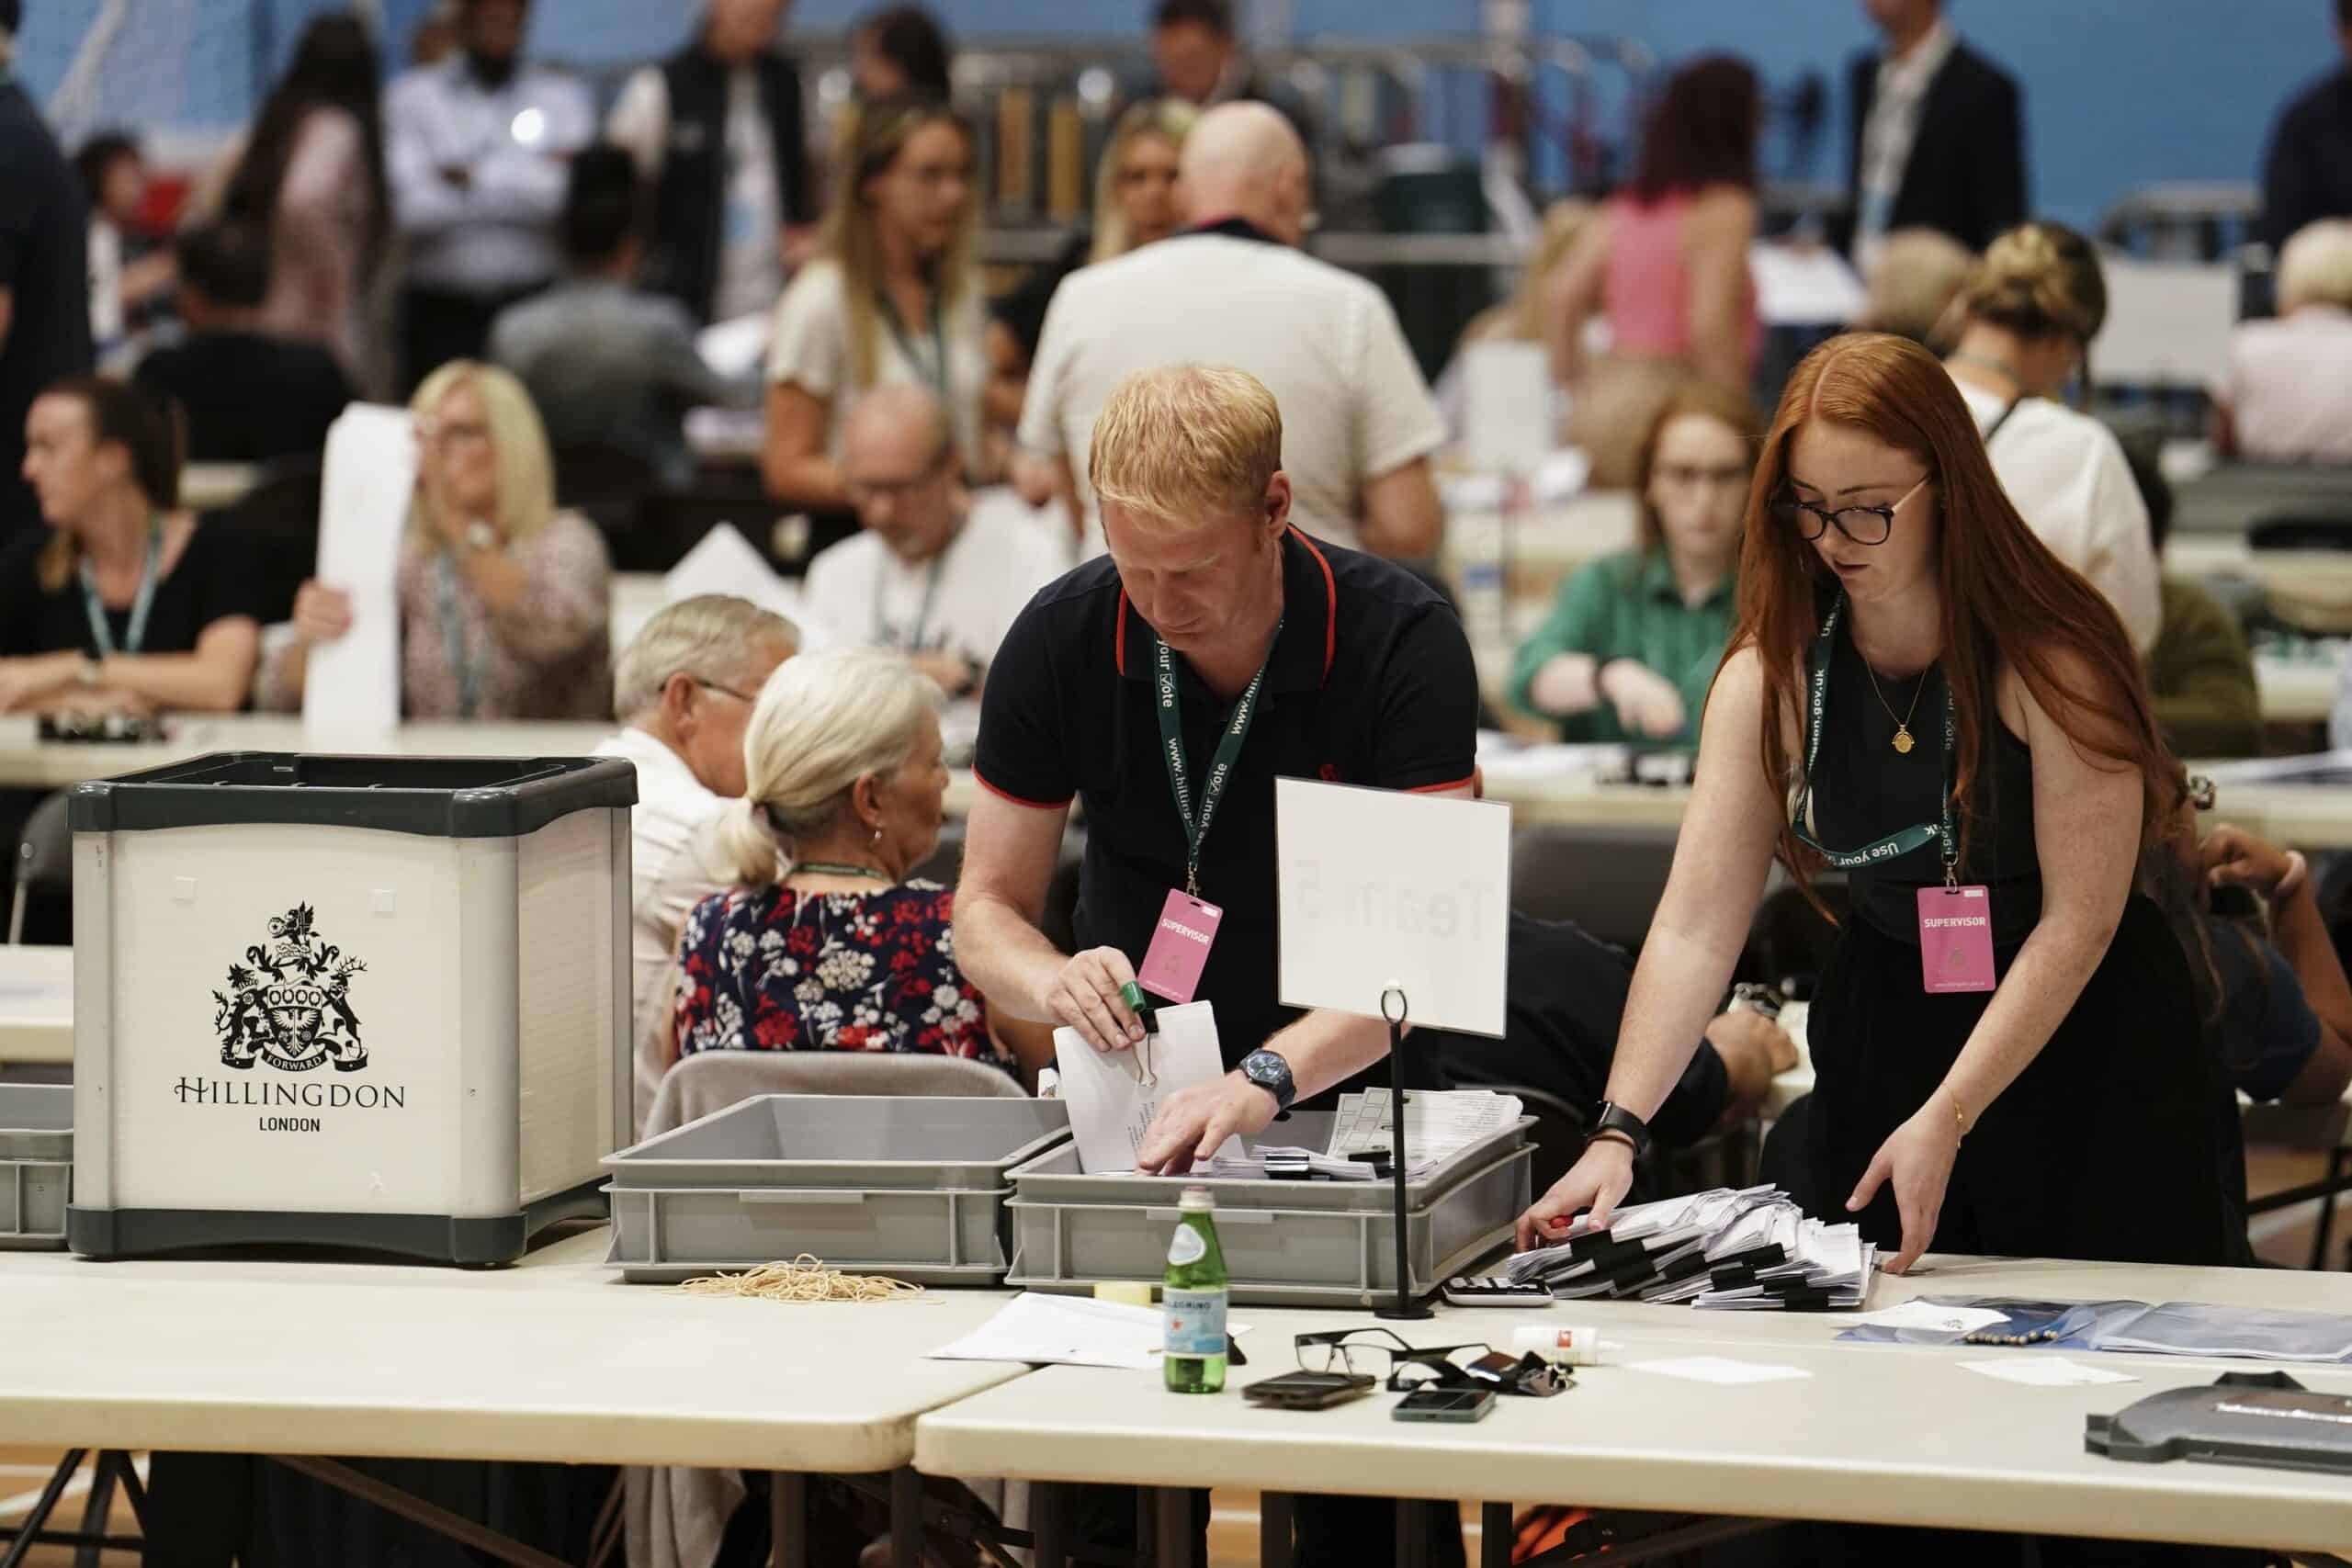 Green Party votes would have handed Labour the win in Uxbridge